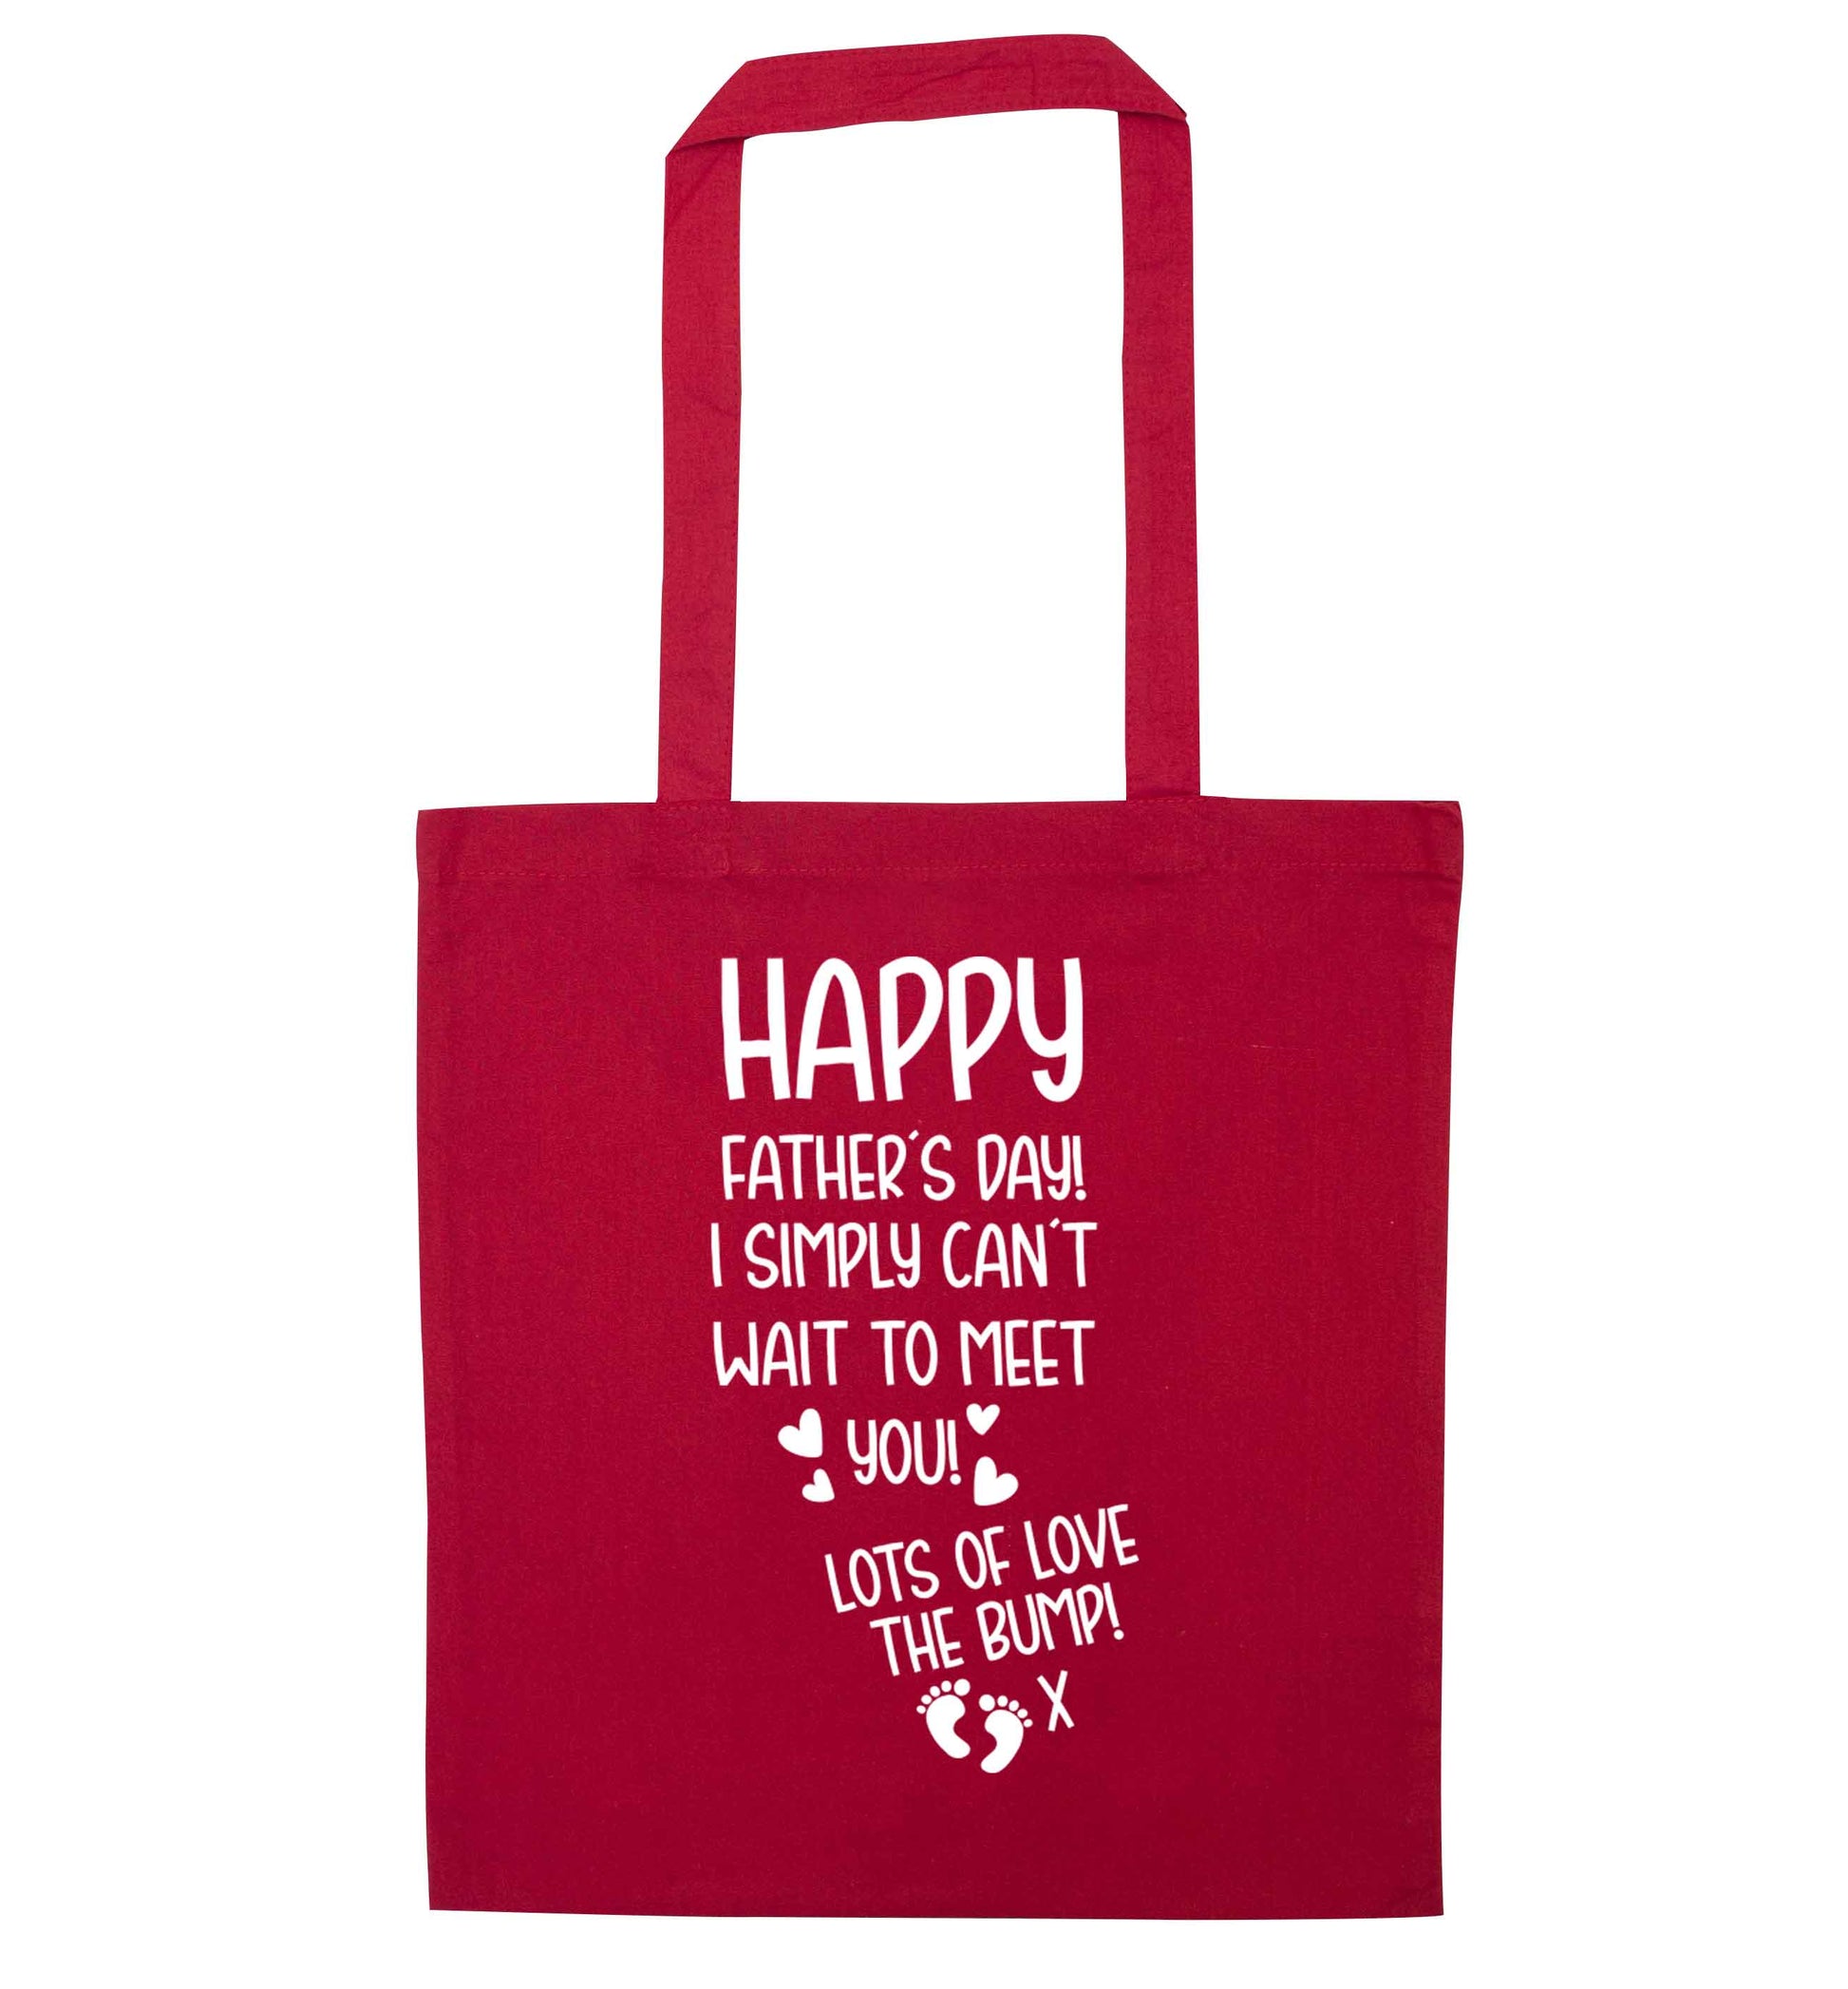 Happy Father's day daddy I can't wait to meet you lot's of love the bump! red tote bag